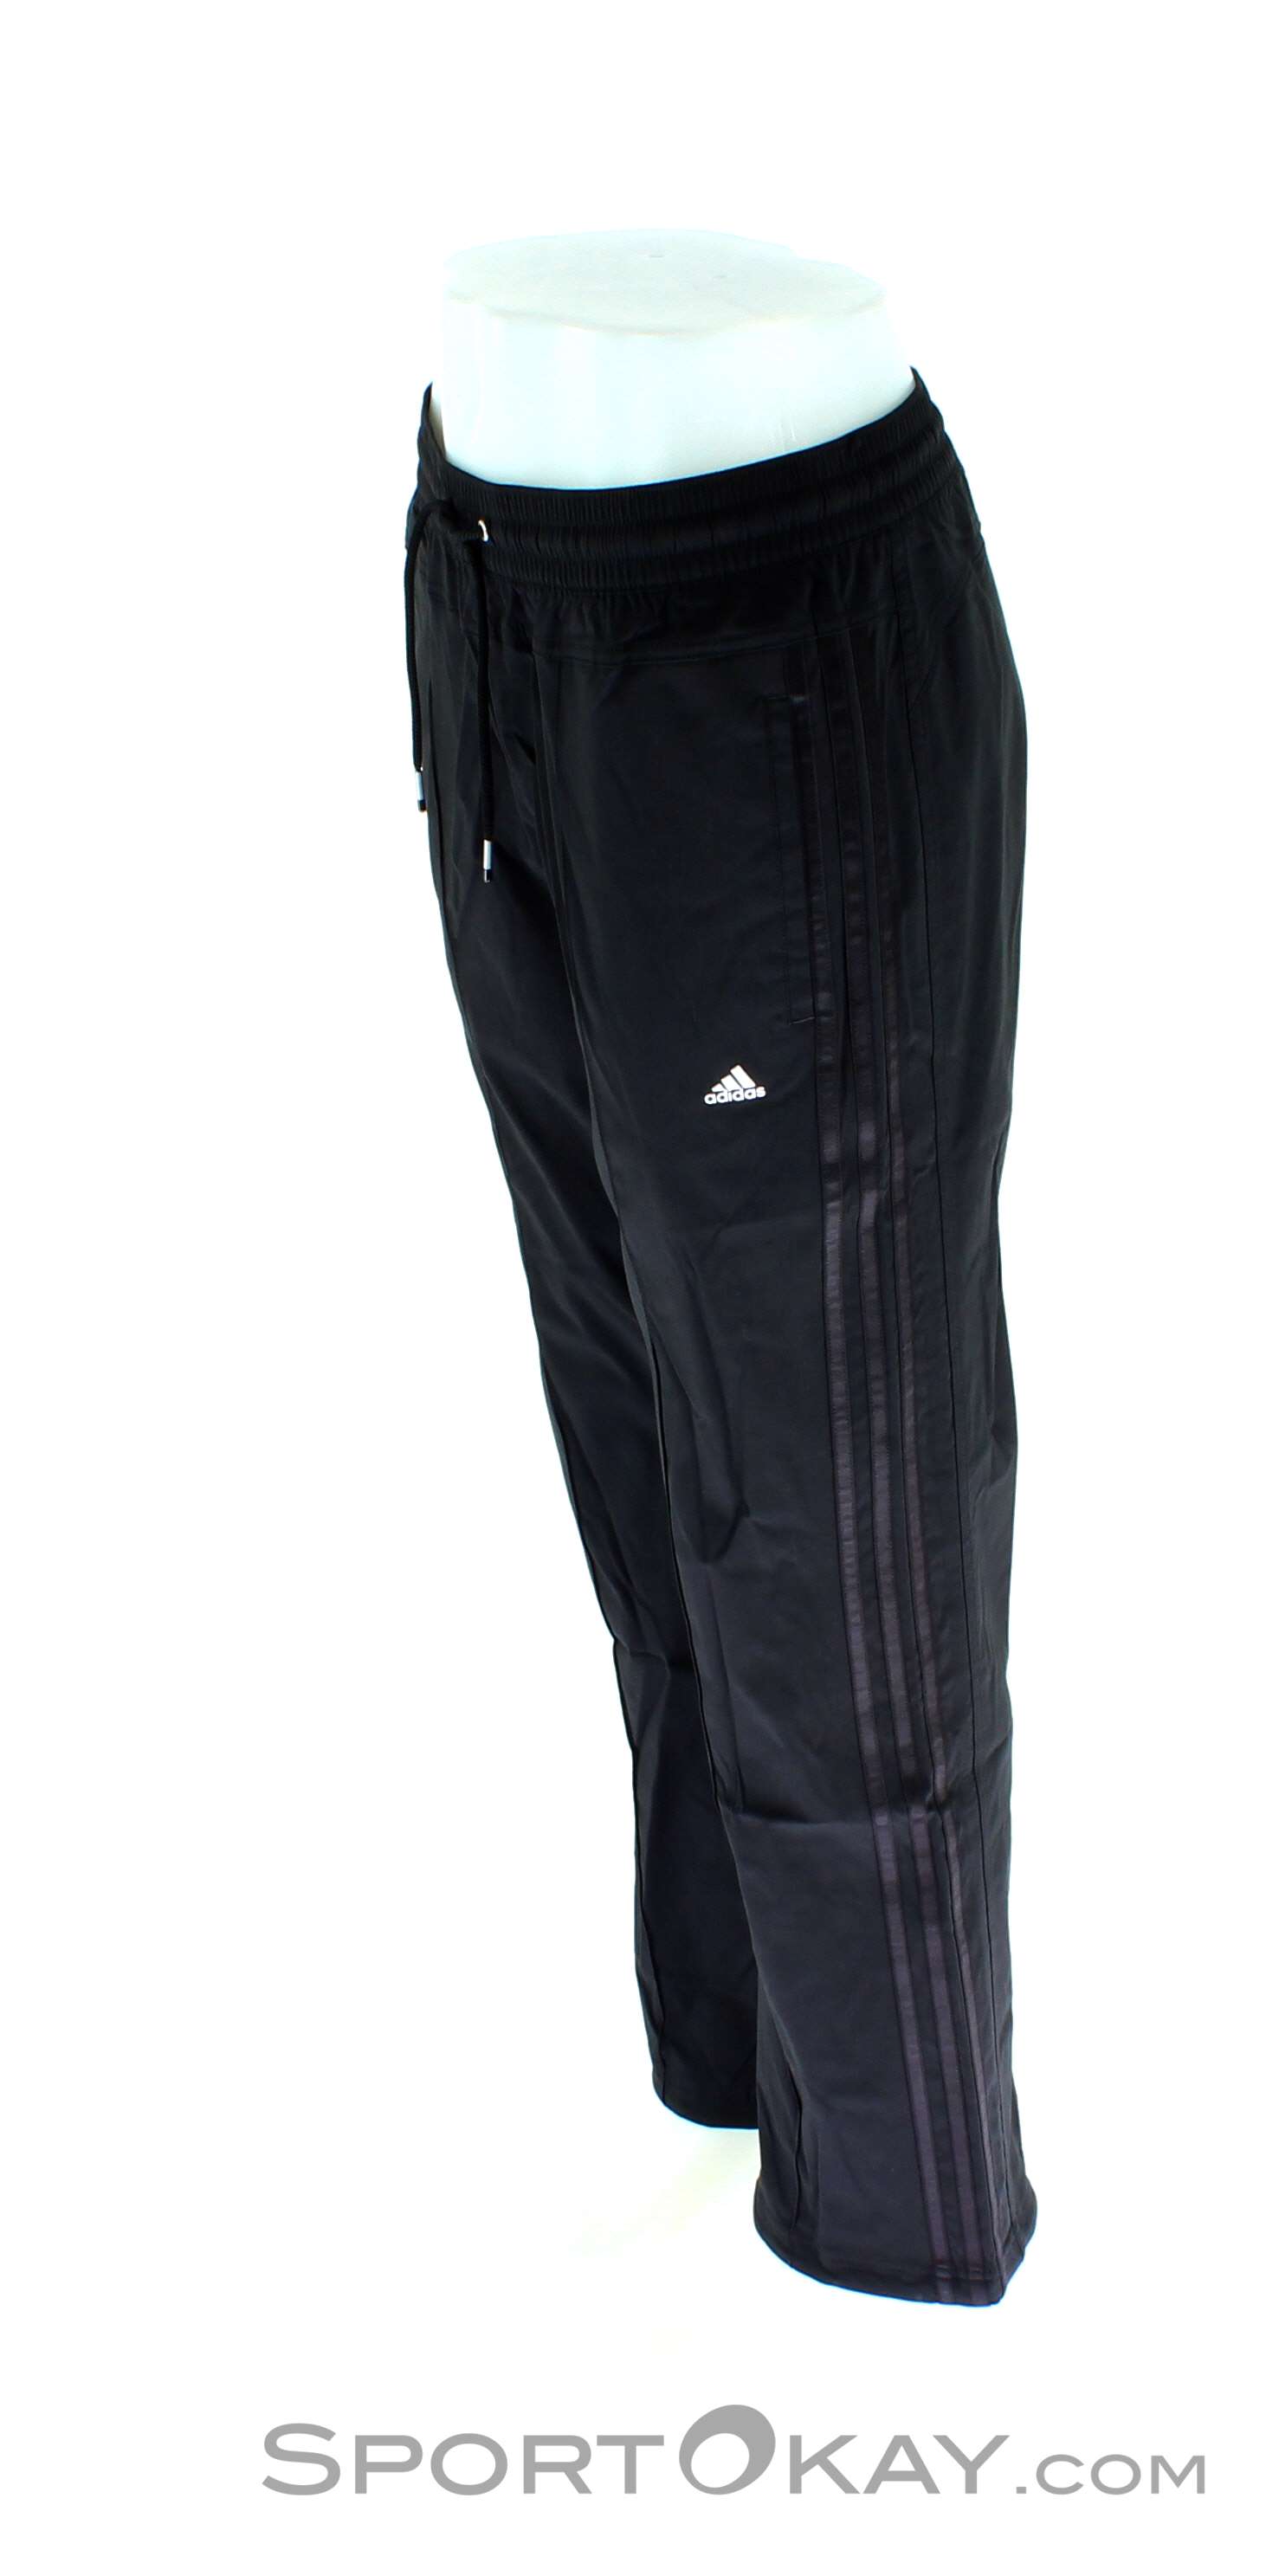 Adidas Climacool Training 3S Woven Stretch Pant Damen Traini - Pants -  Fitness Clothing - Fitness - All